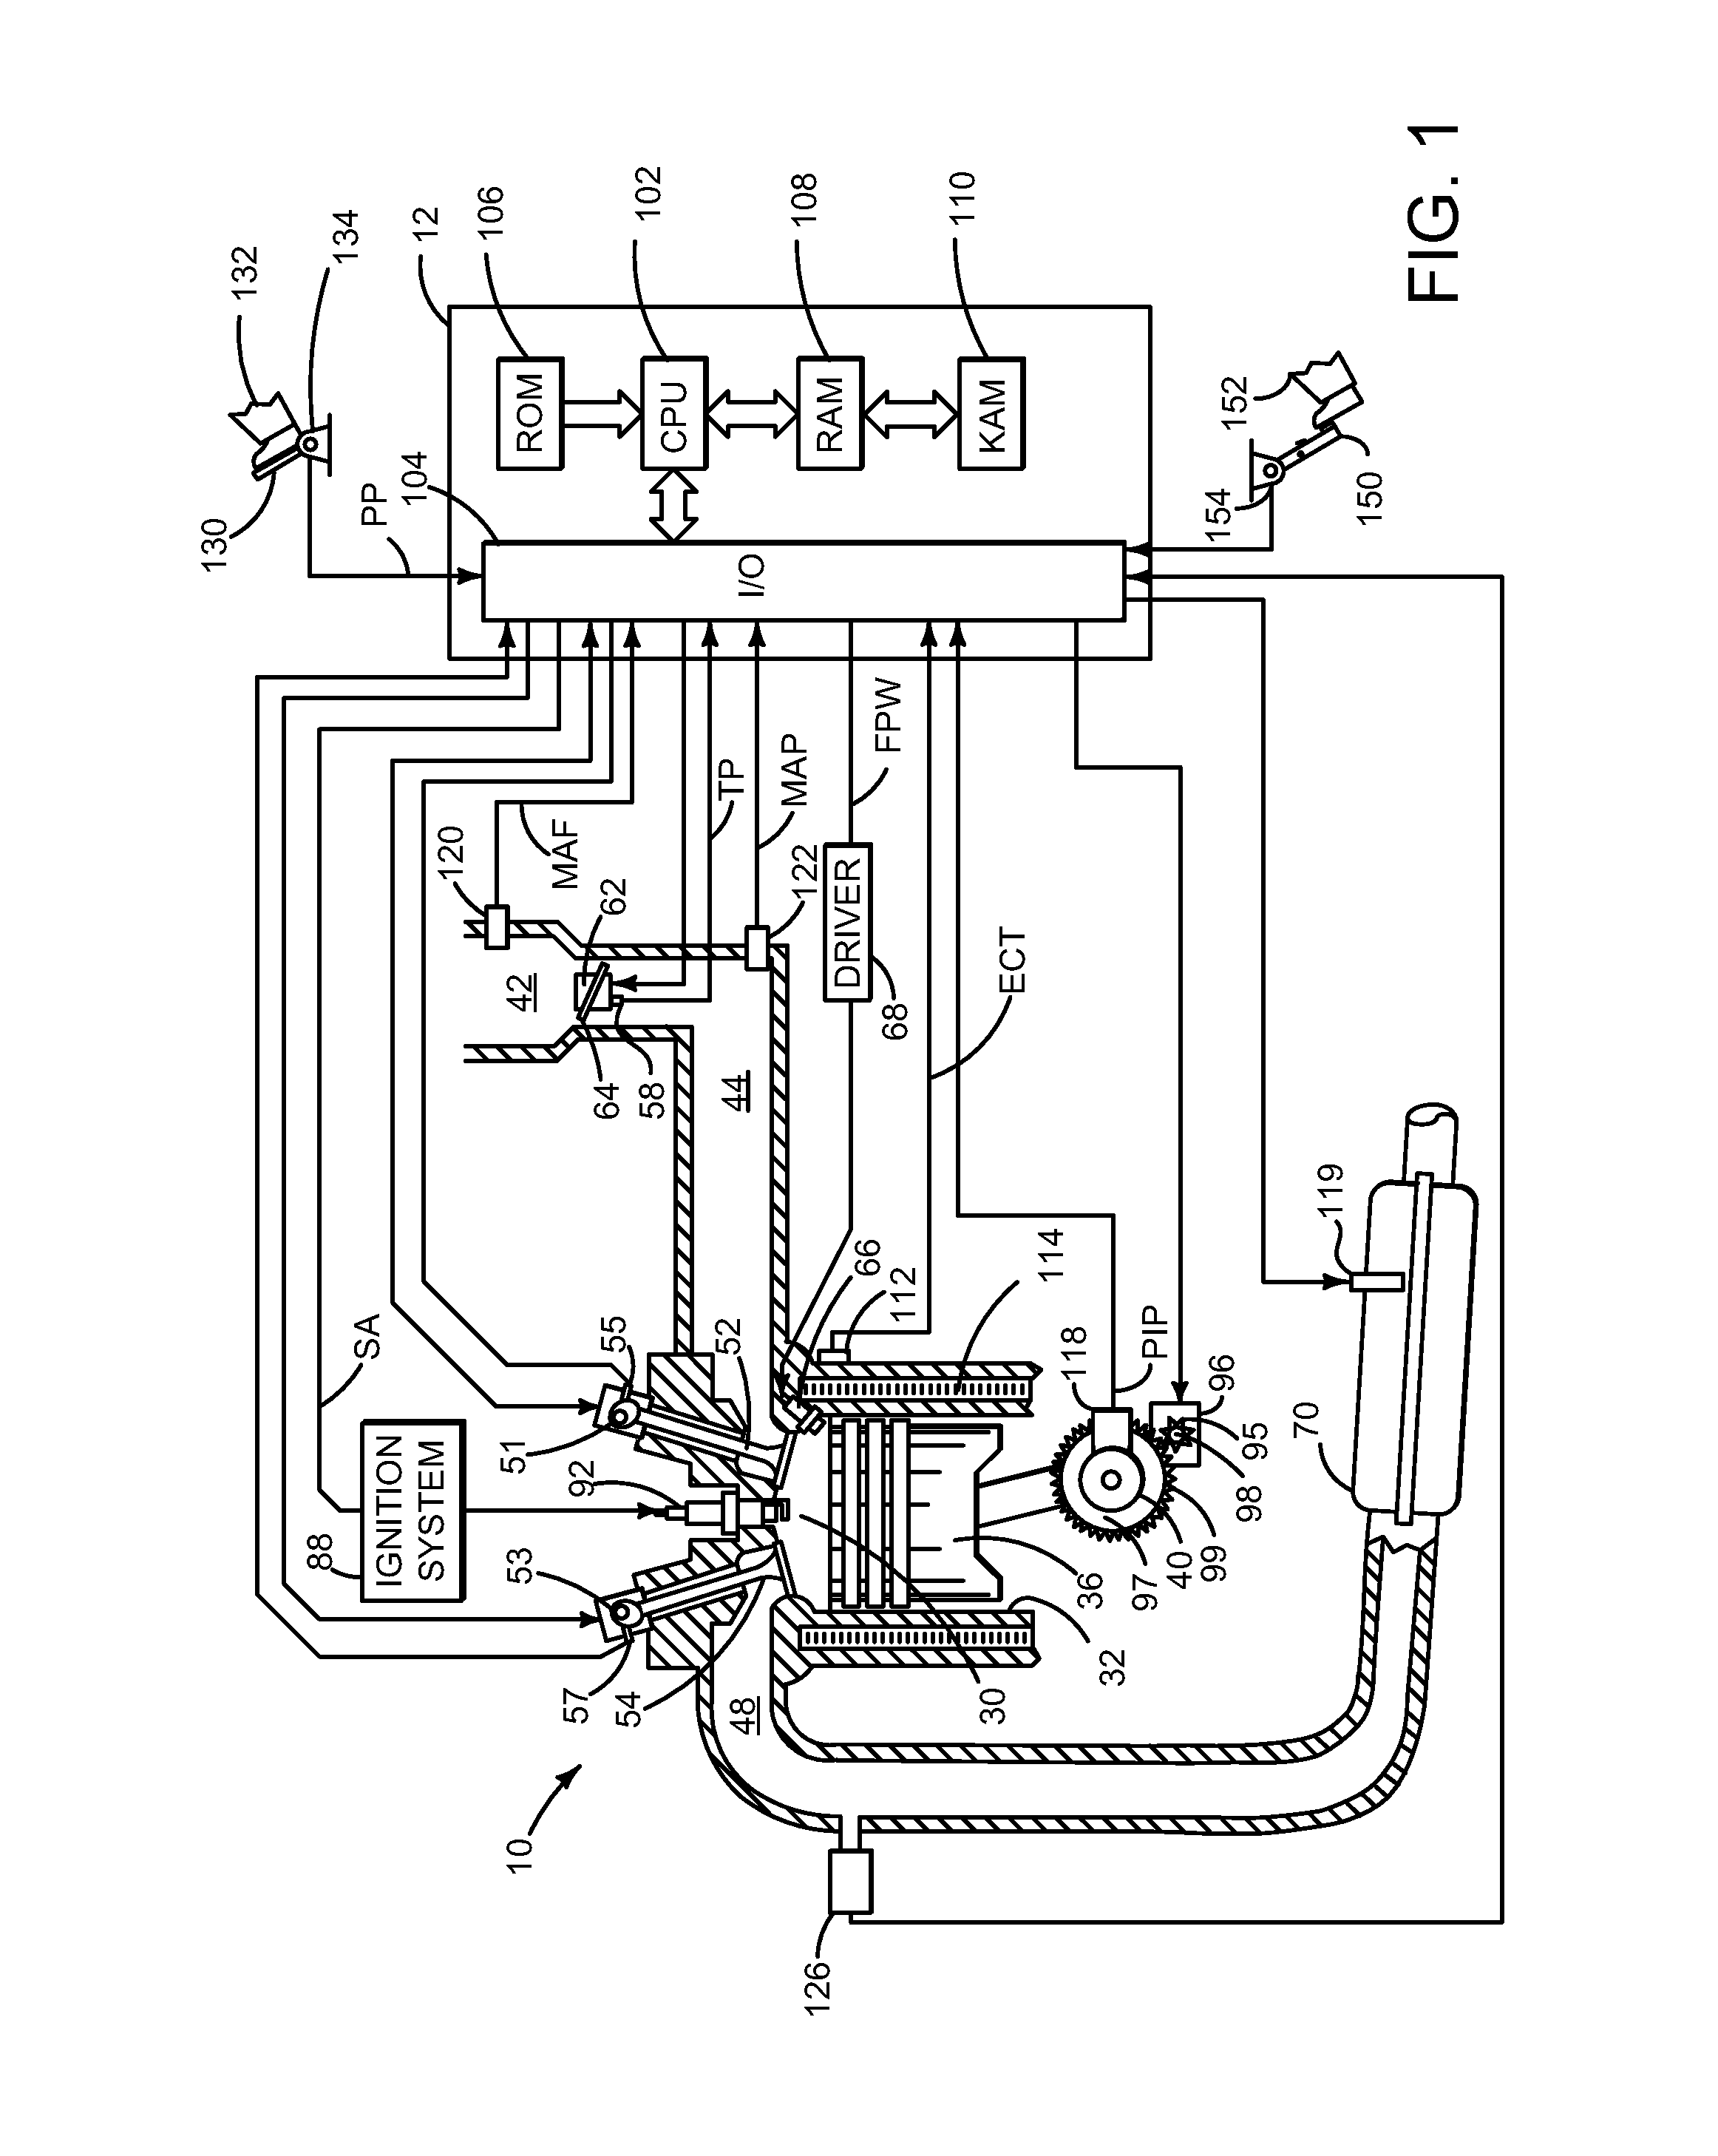 Methods and systems for driveline sailing mode entry